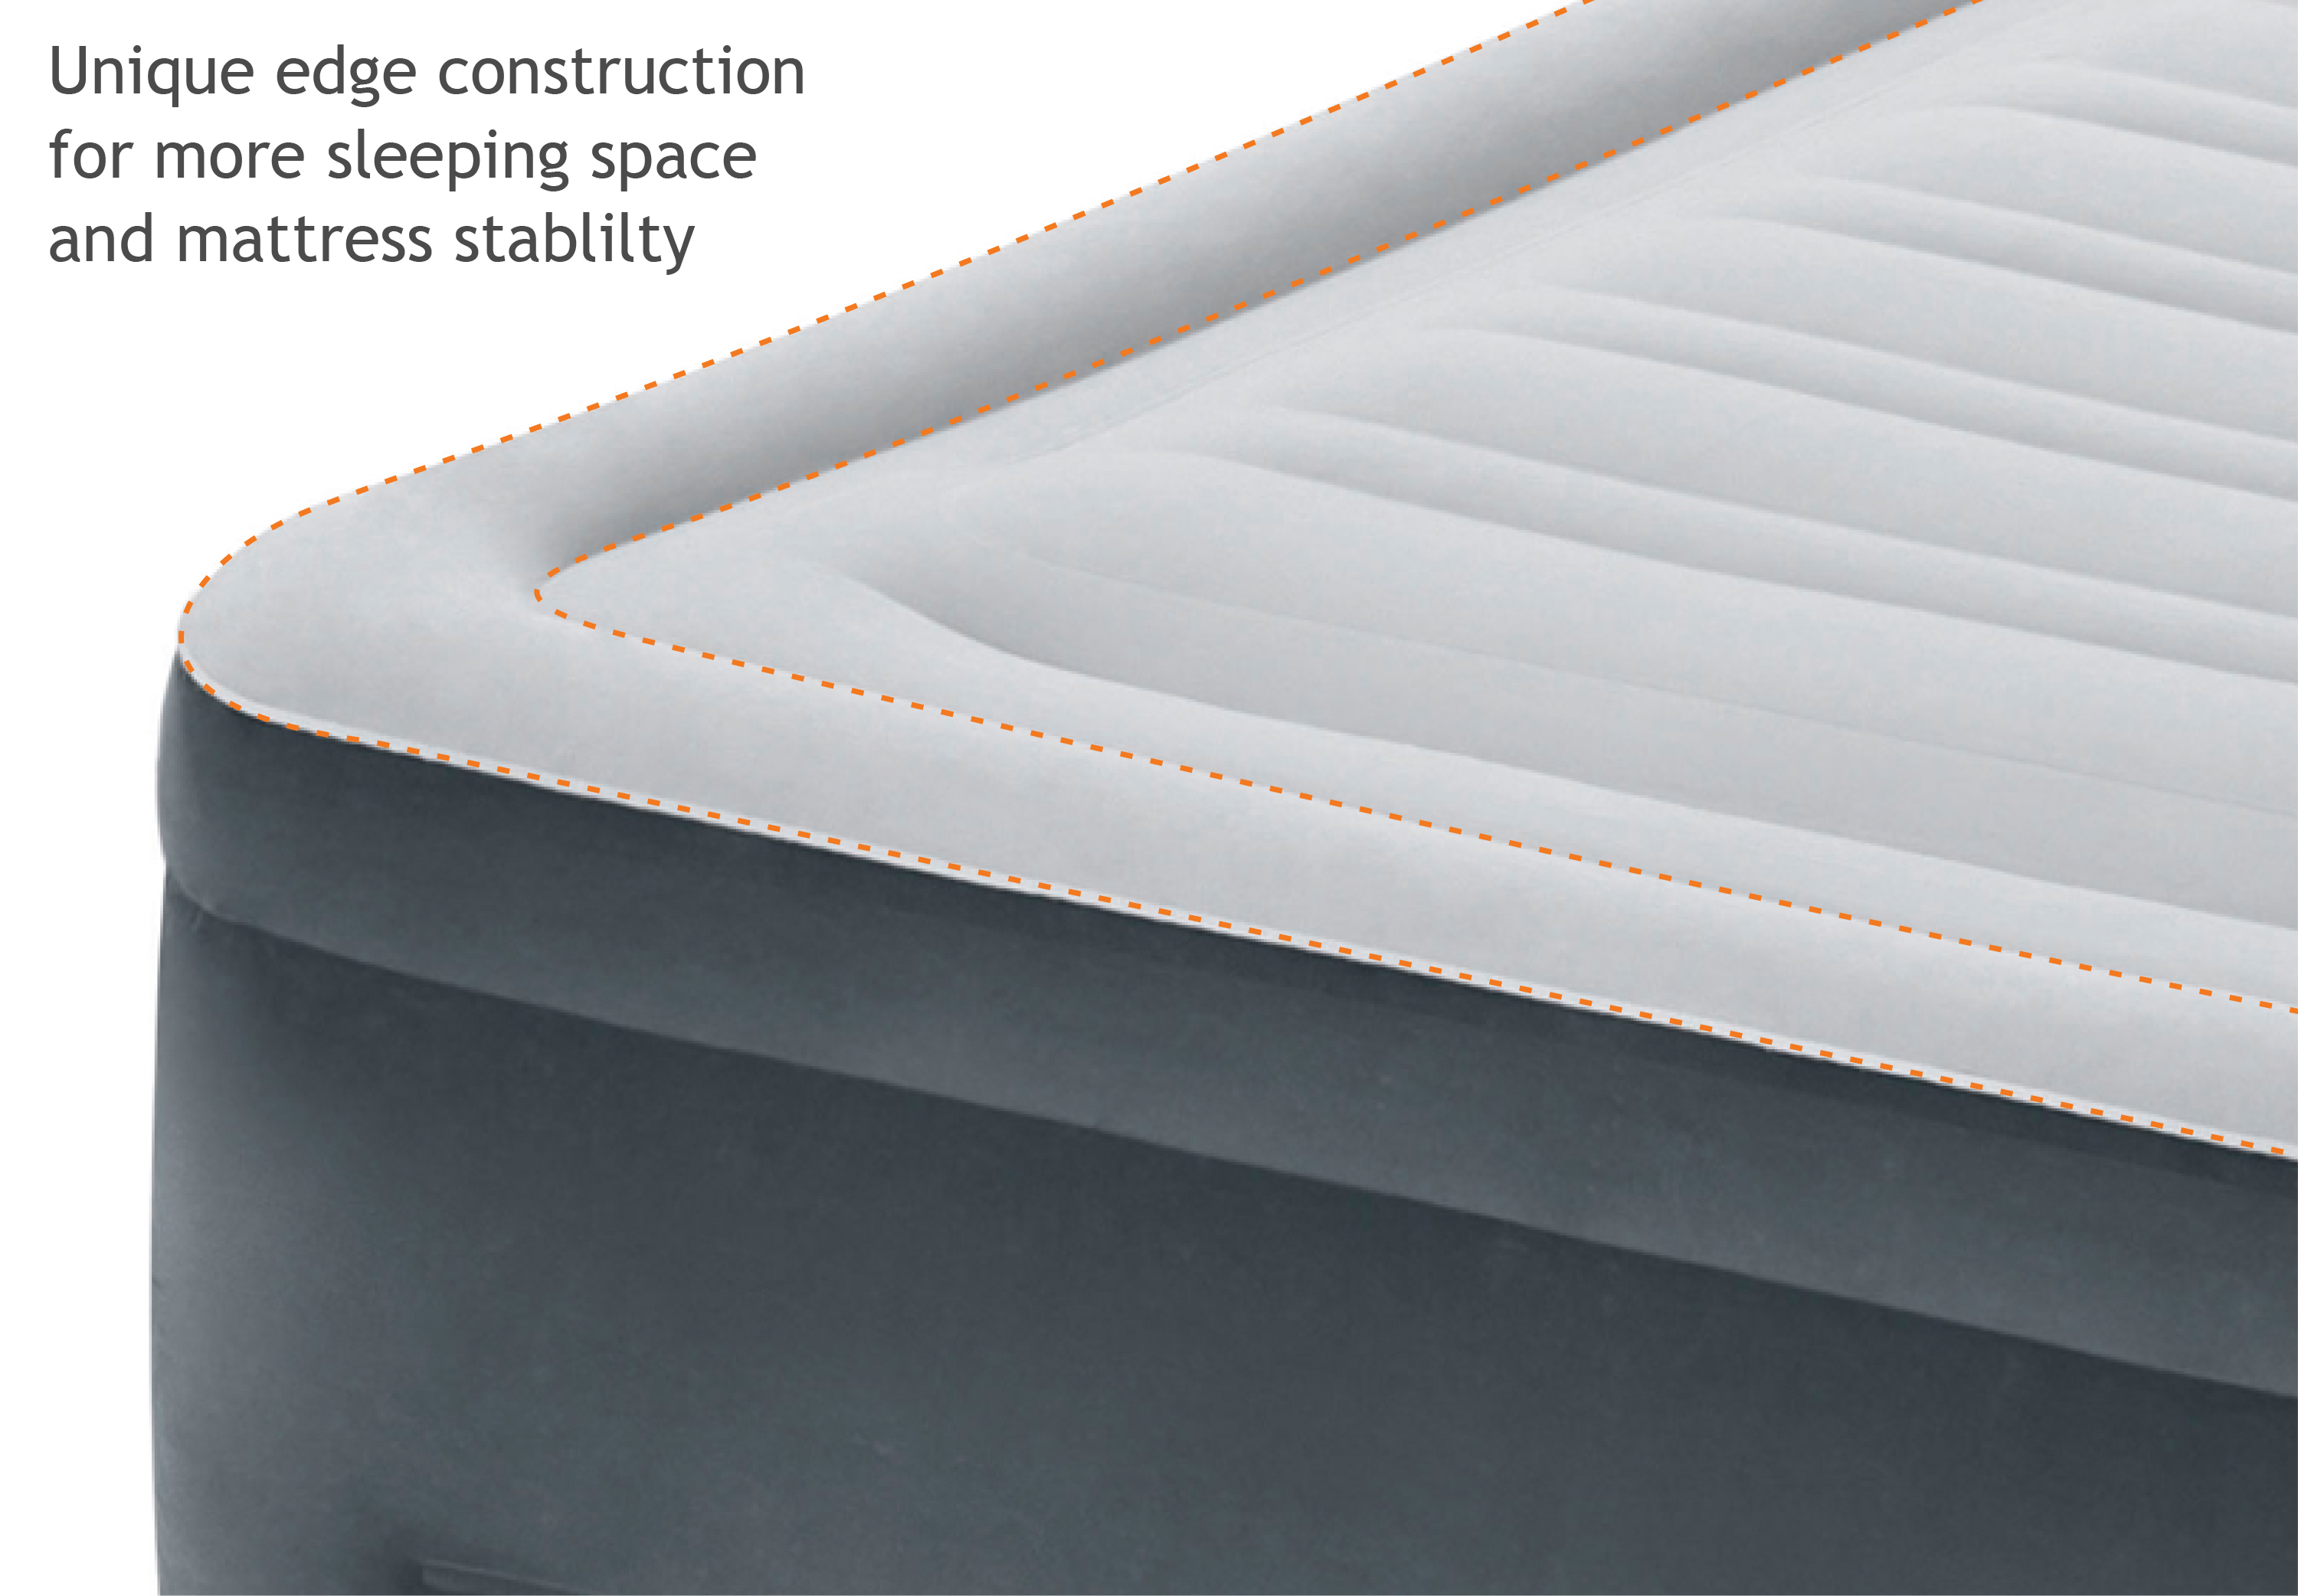 Intex 22" Queen Comfort Plush High Rise Durabeam Airbed Mattress with Built-In Pump - image 7 of 13